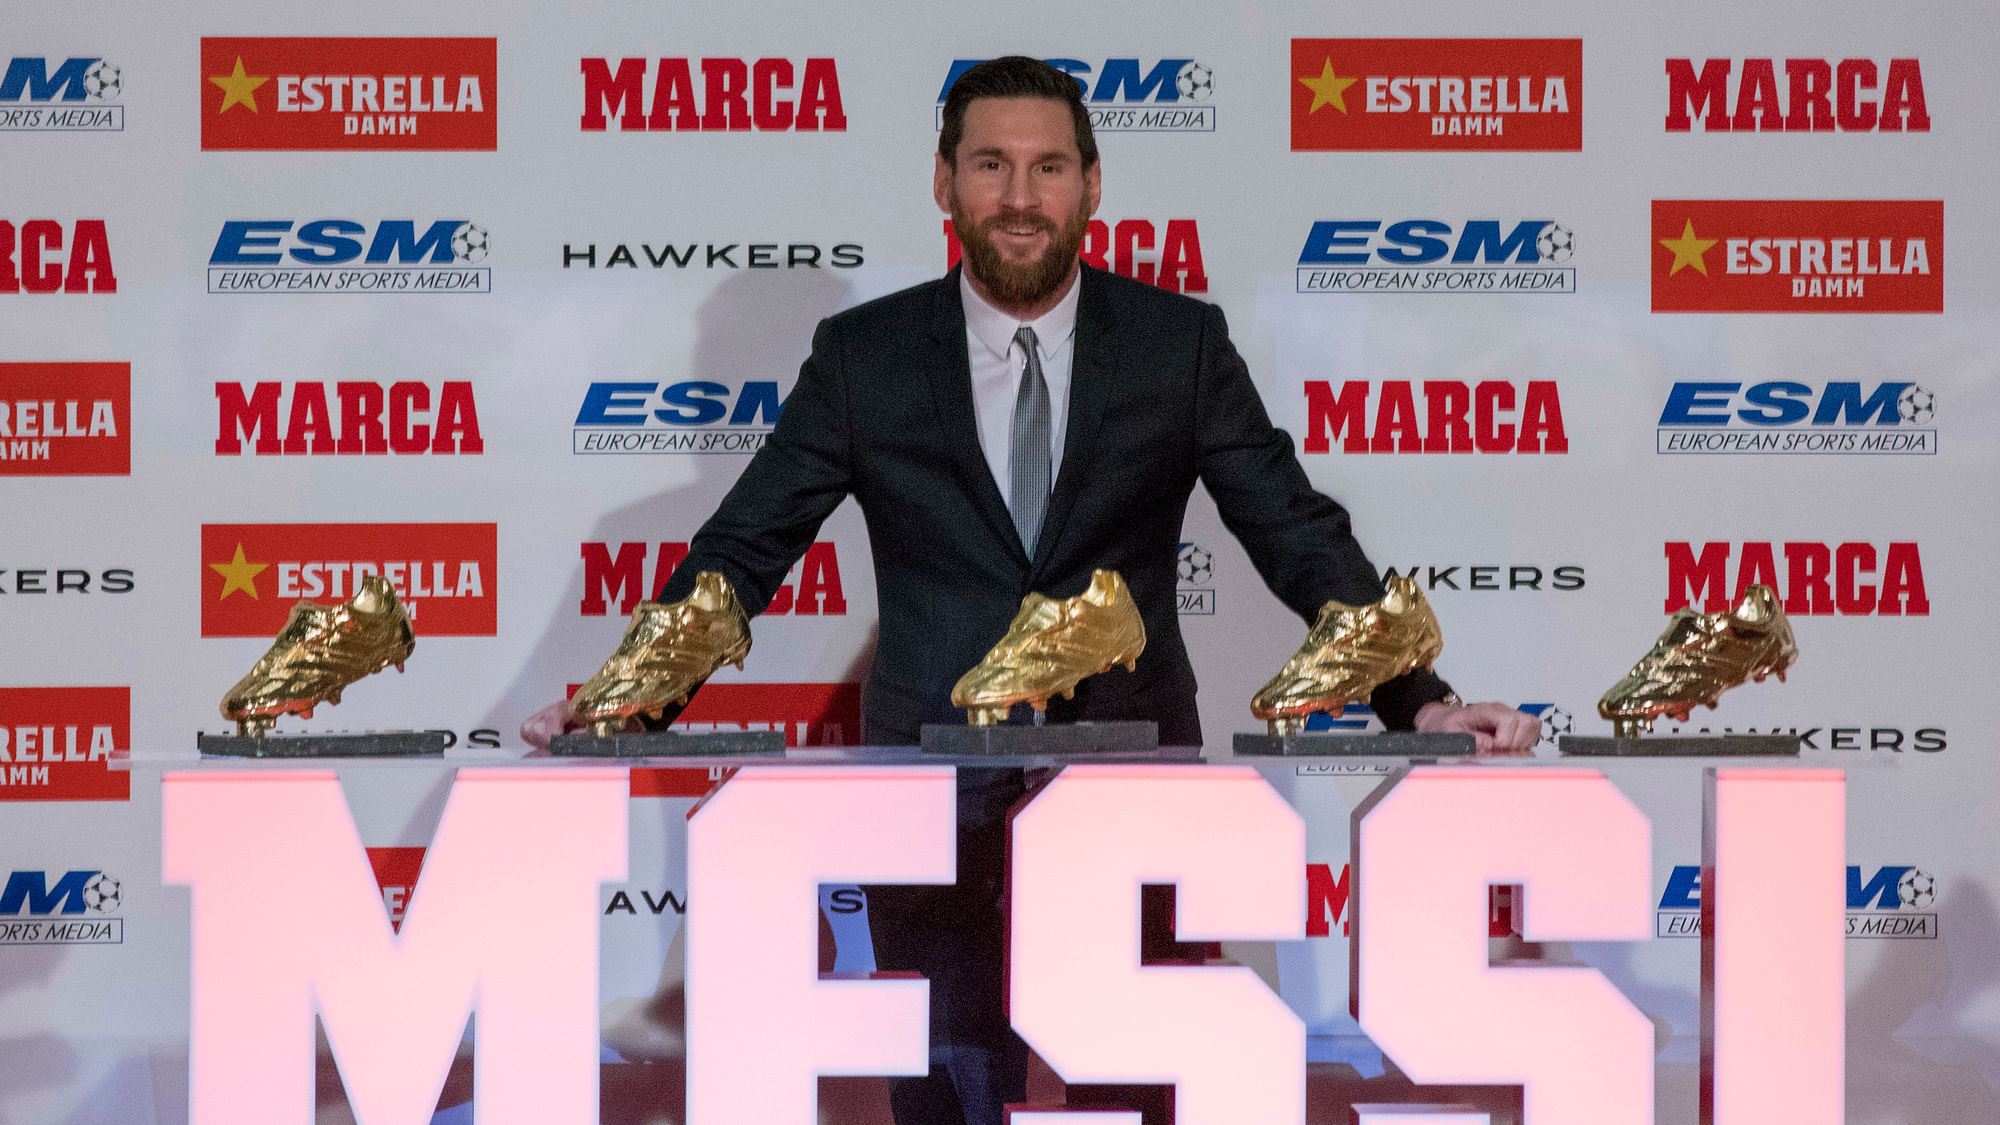 Lionel Messi received his record fifth Golden Shoe award on Tuesday for leading all of Europe’s soccer leagues in scoring last season.